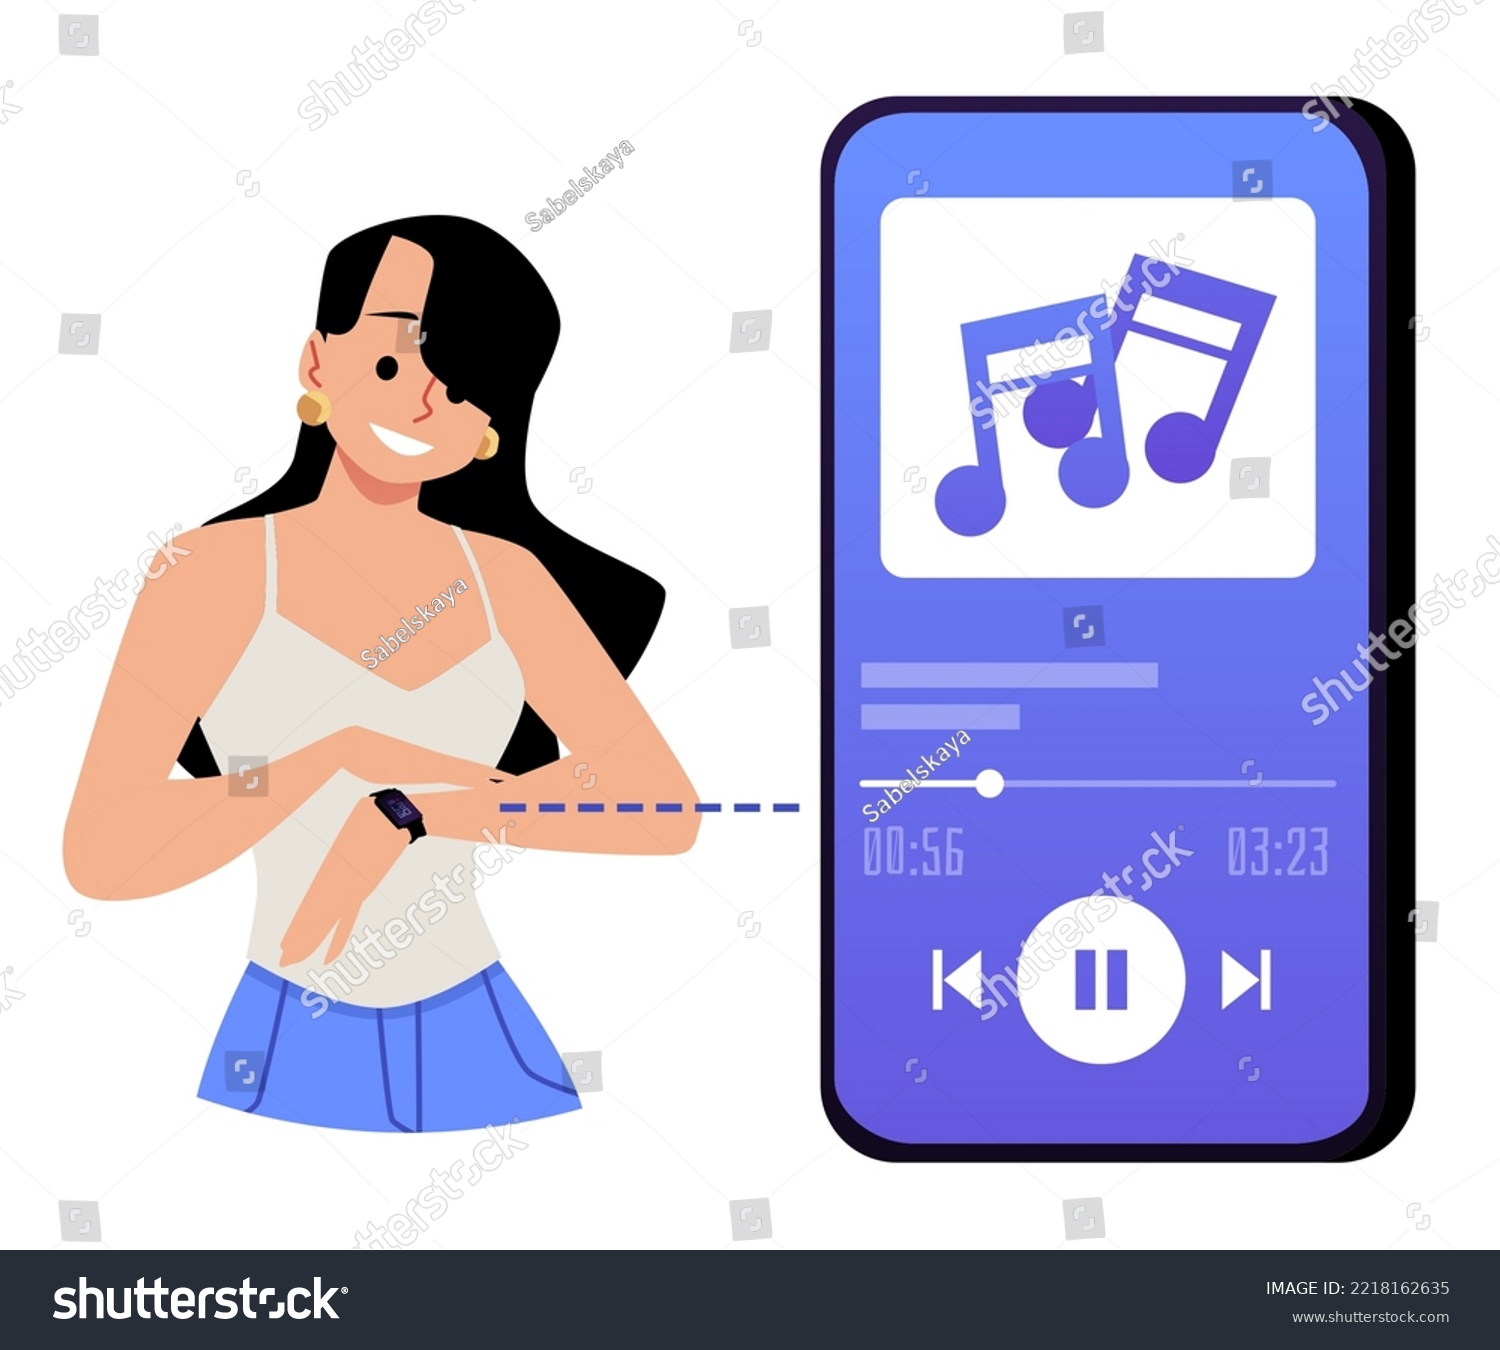 SVG of Happy woman managing music player on phone with smart watches, flat vector illustration isolated on white background. Character listening music thorog player on modern smartwatches. svg